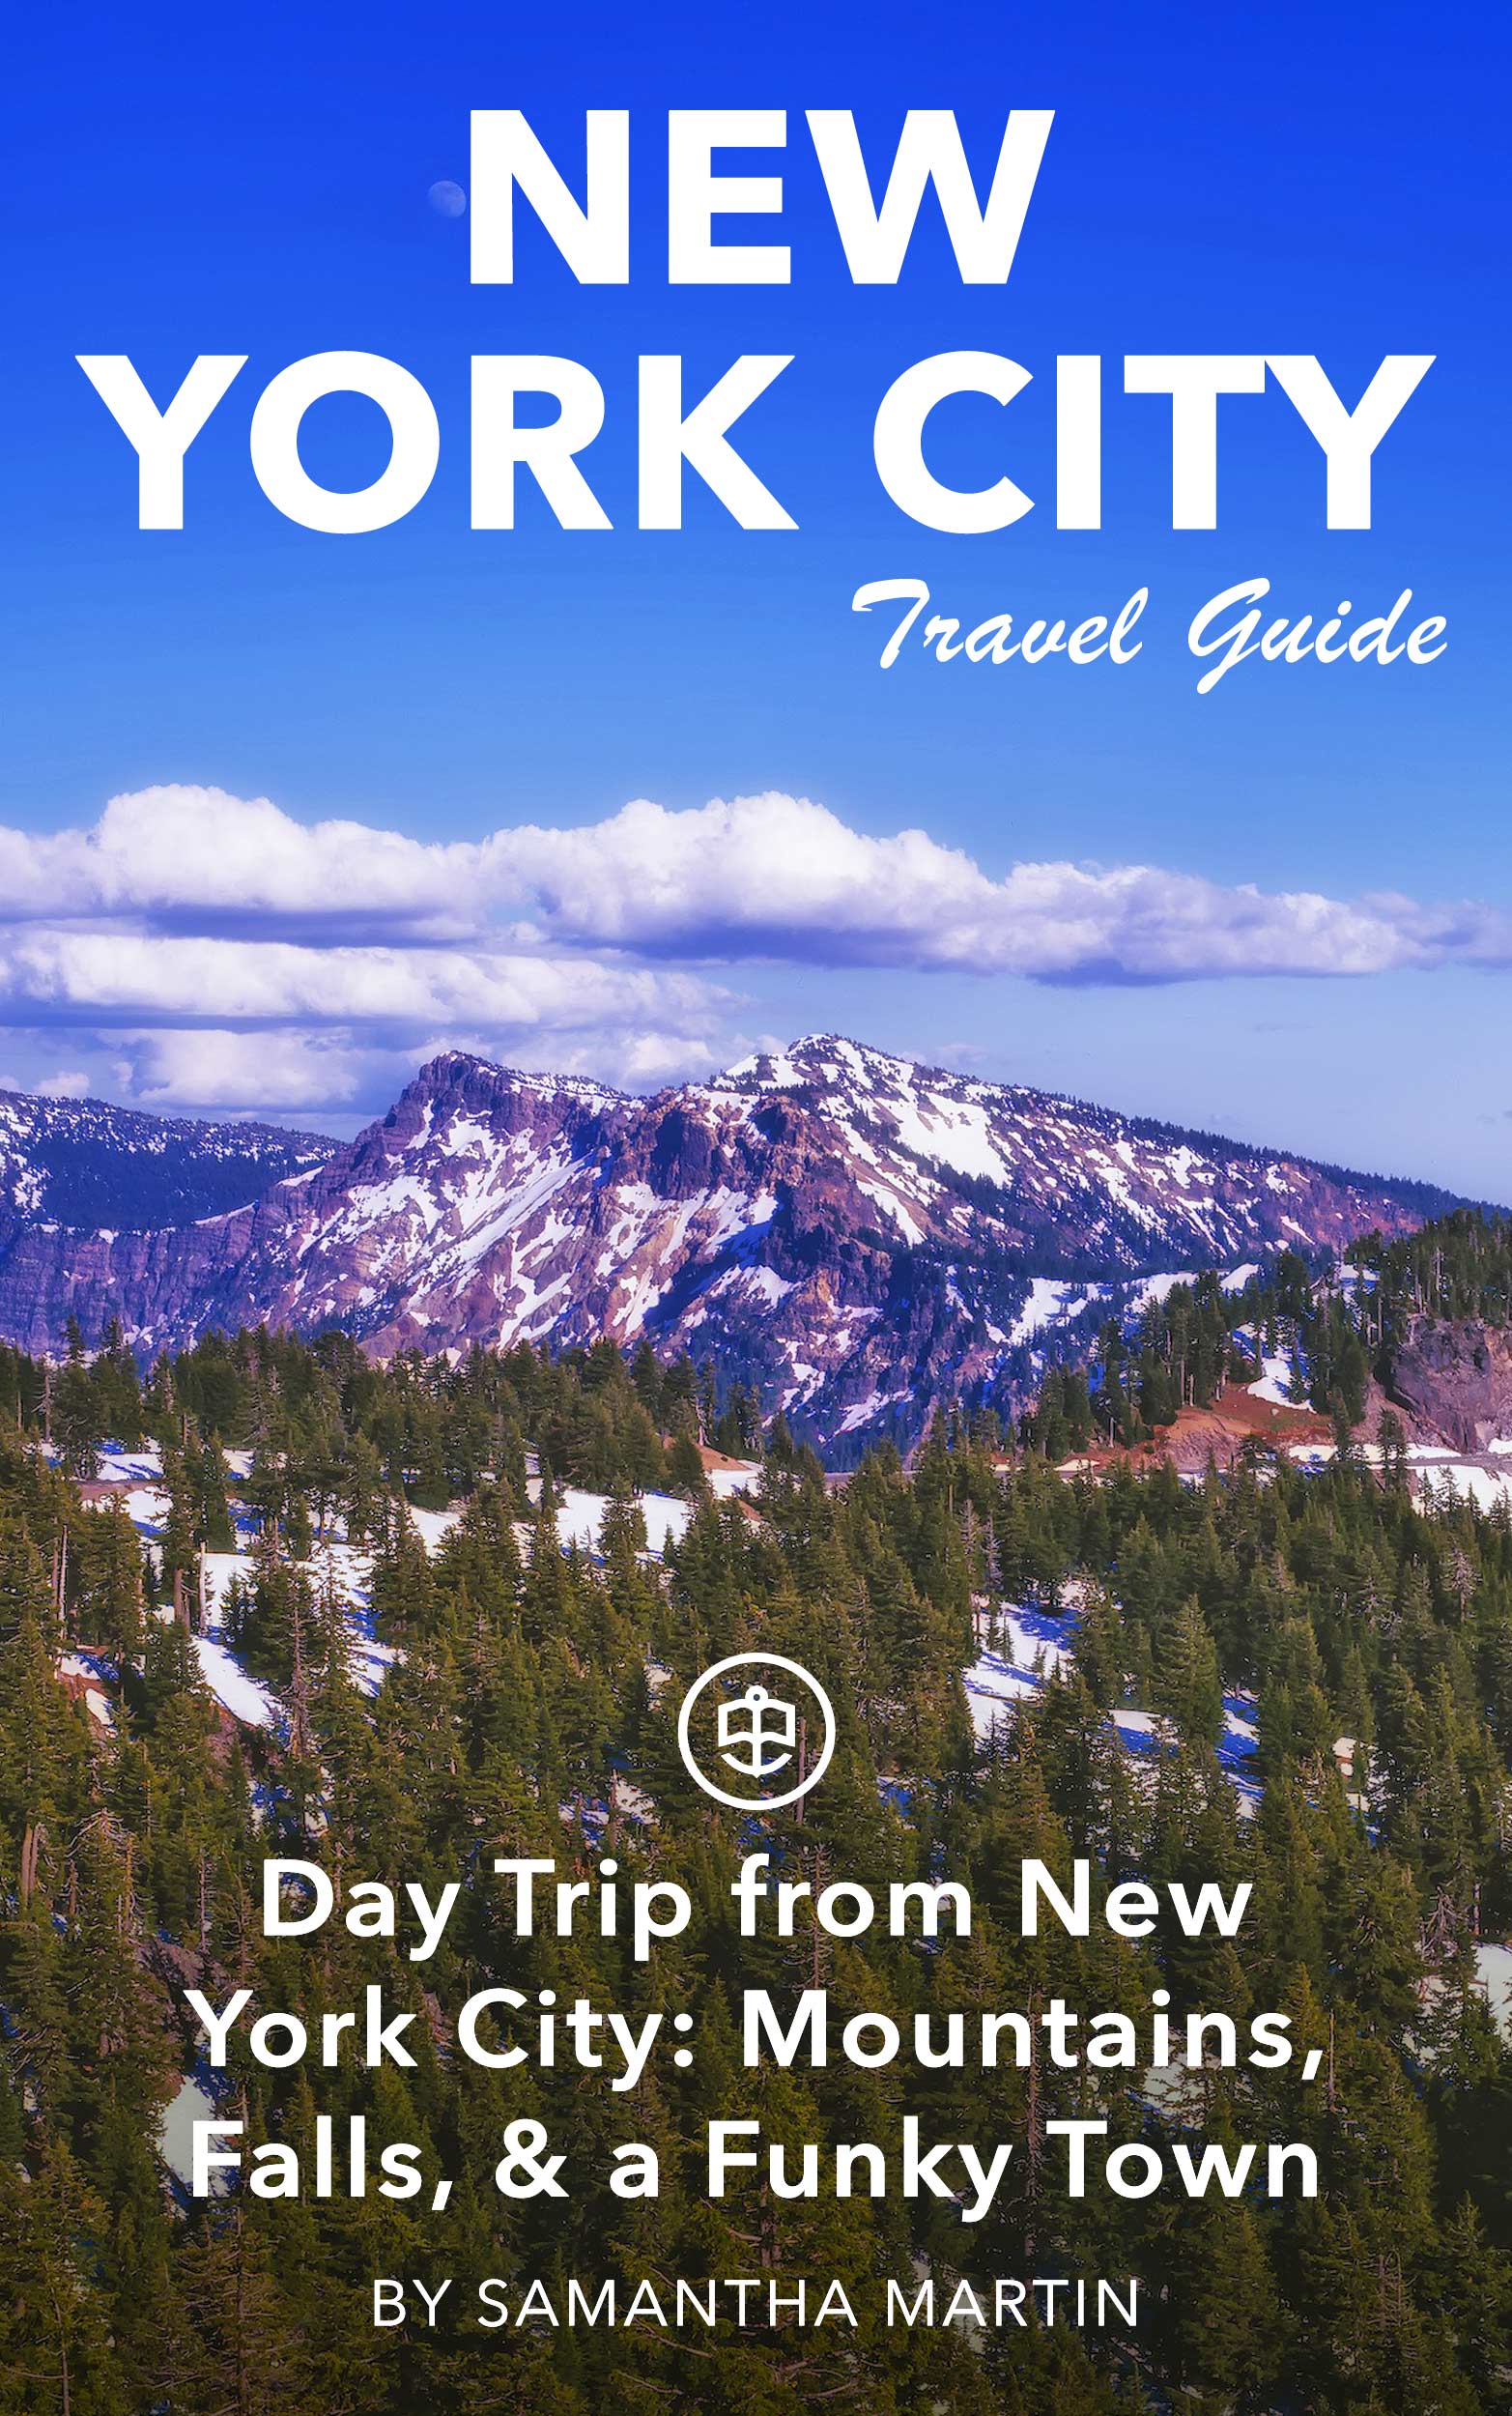 Day Trip from New York City: Mountains, Falls, & a Funky Town